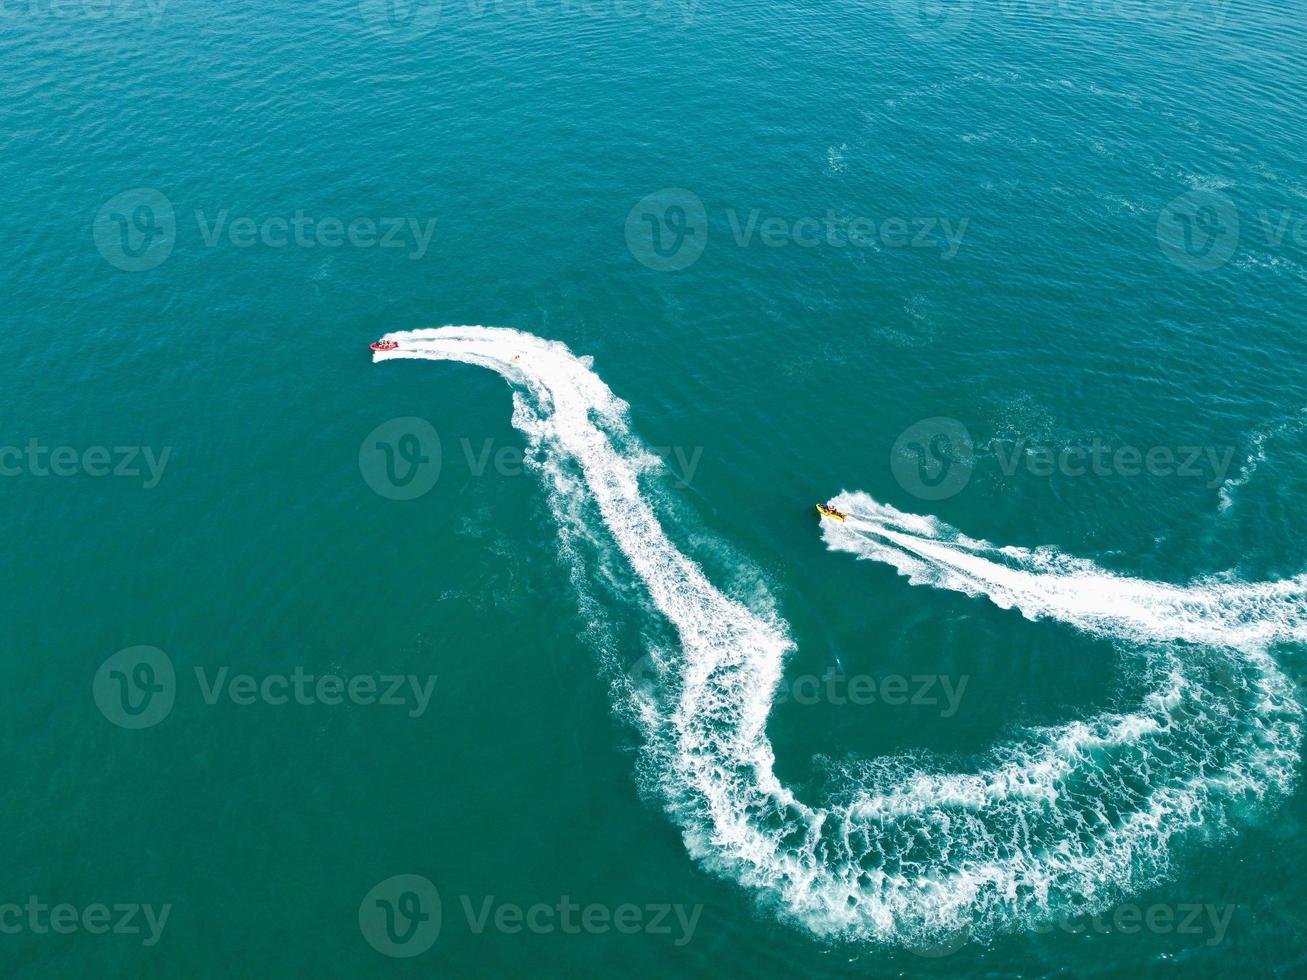 High Angle Footage and Aerial view of Ocean with High Speed Boats, People are having fun and enjoying hottest weather at Bournemouth Beach Sea Front of England UK. photo